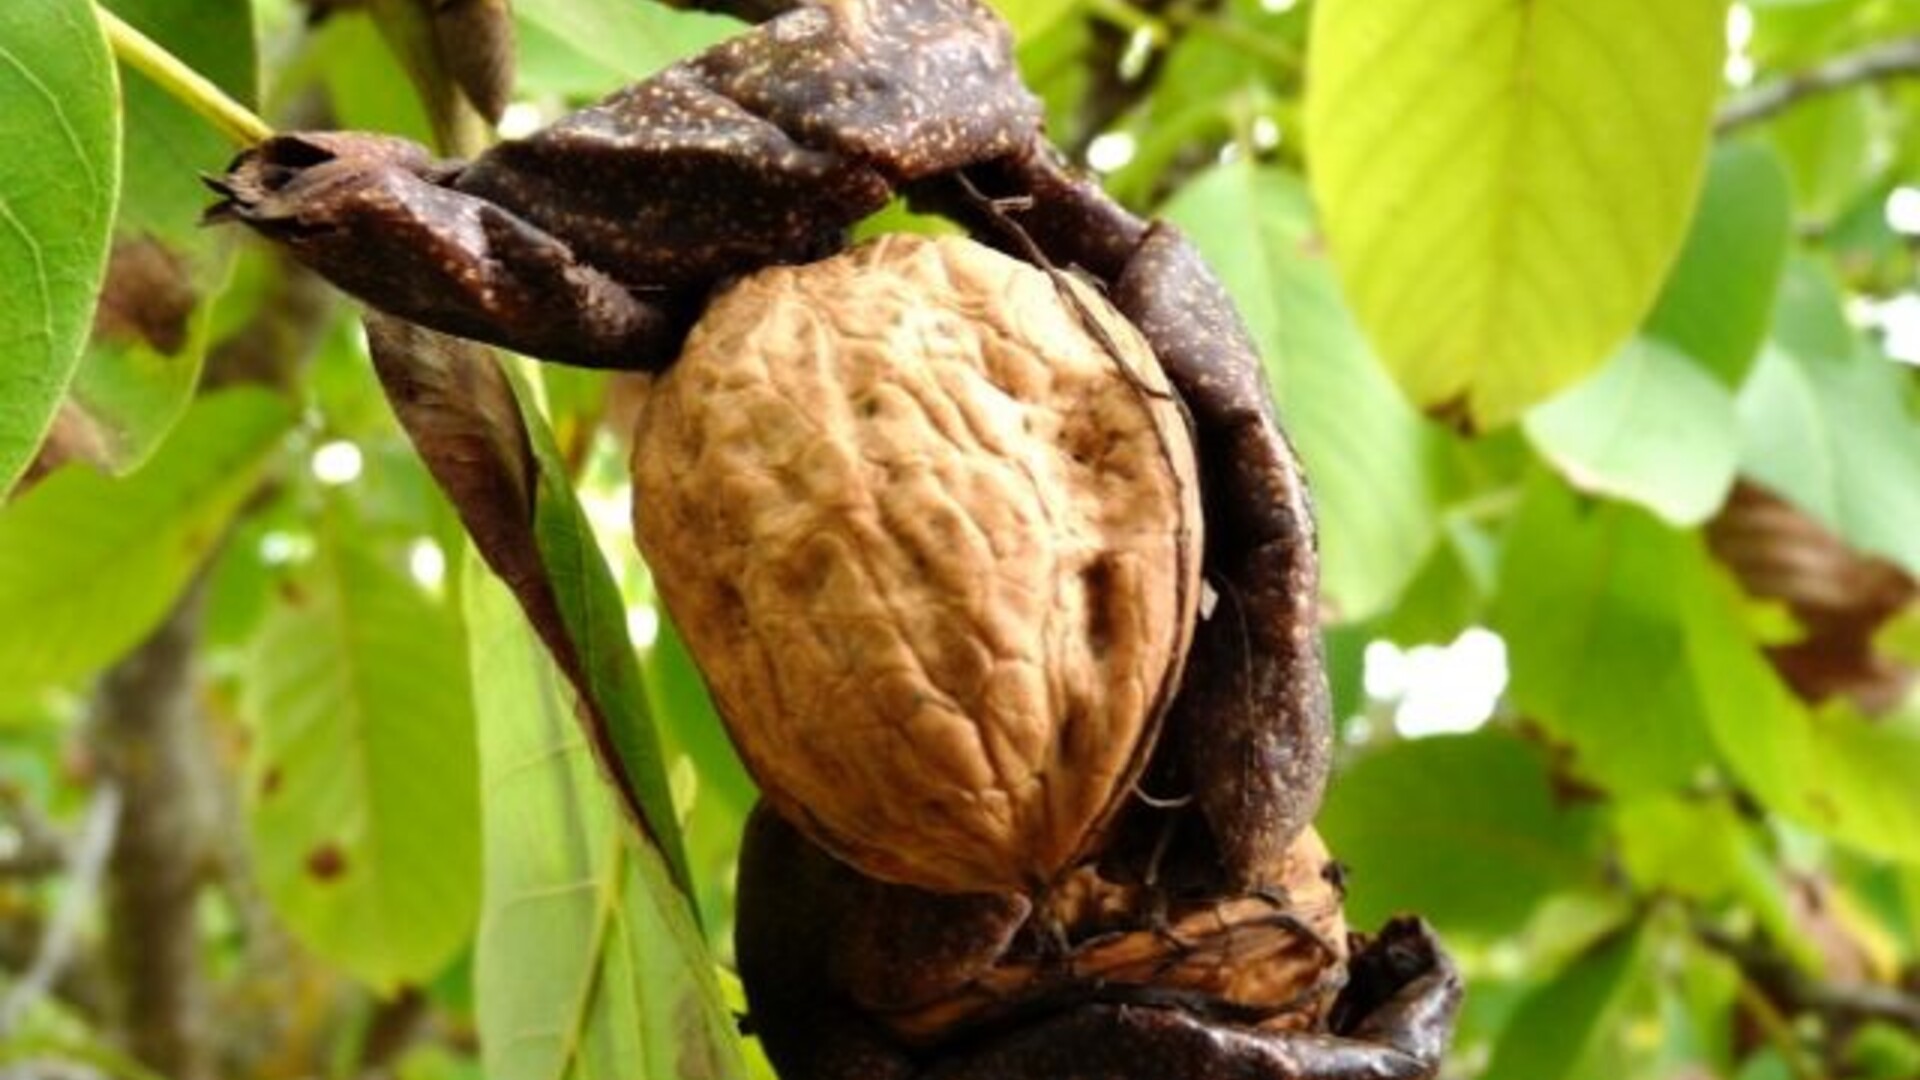 Research on Phytopthora Crown Gall on Walnuts